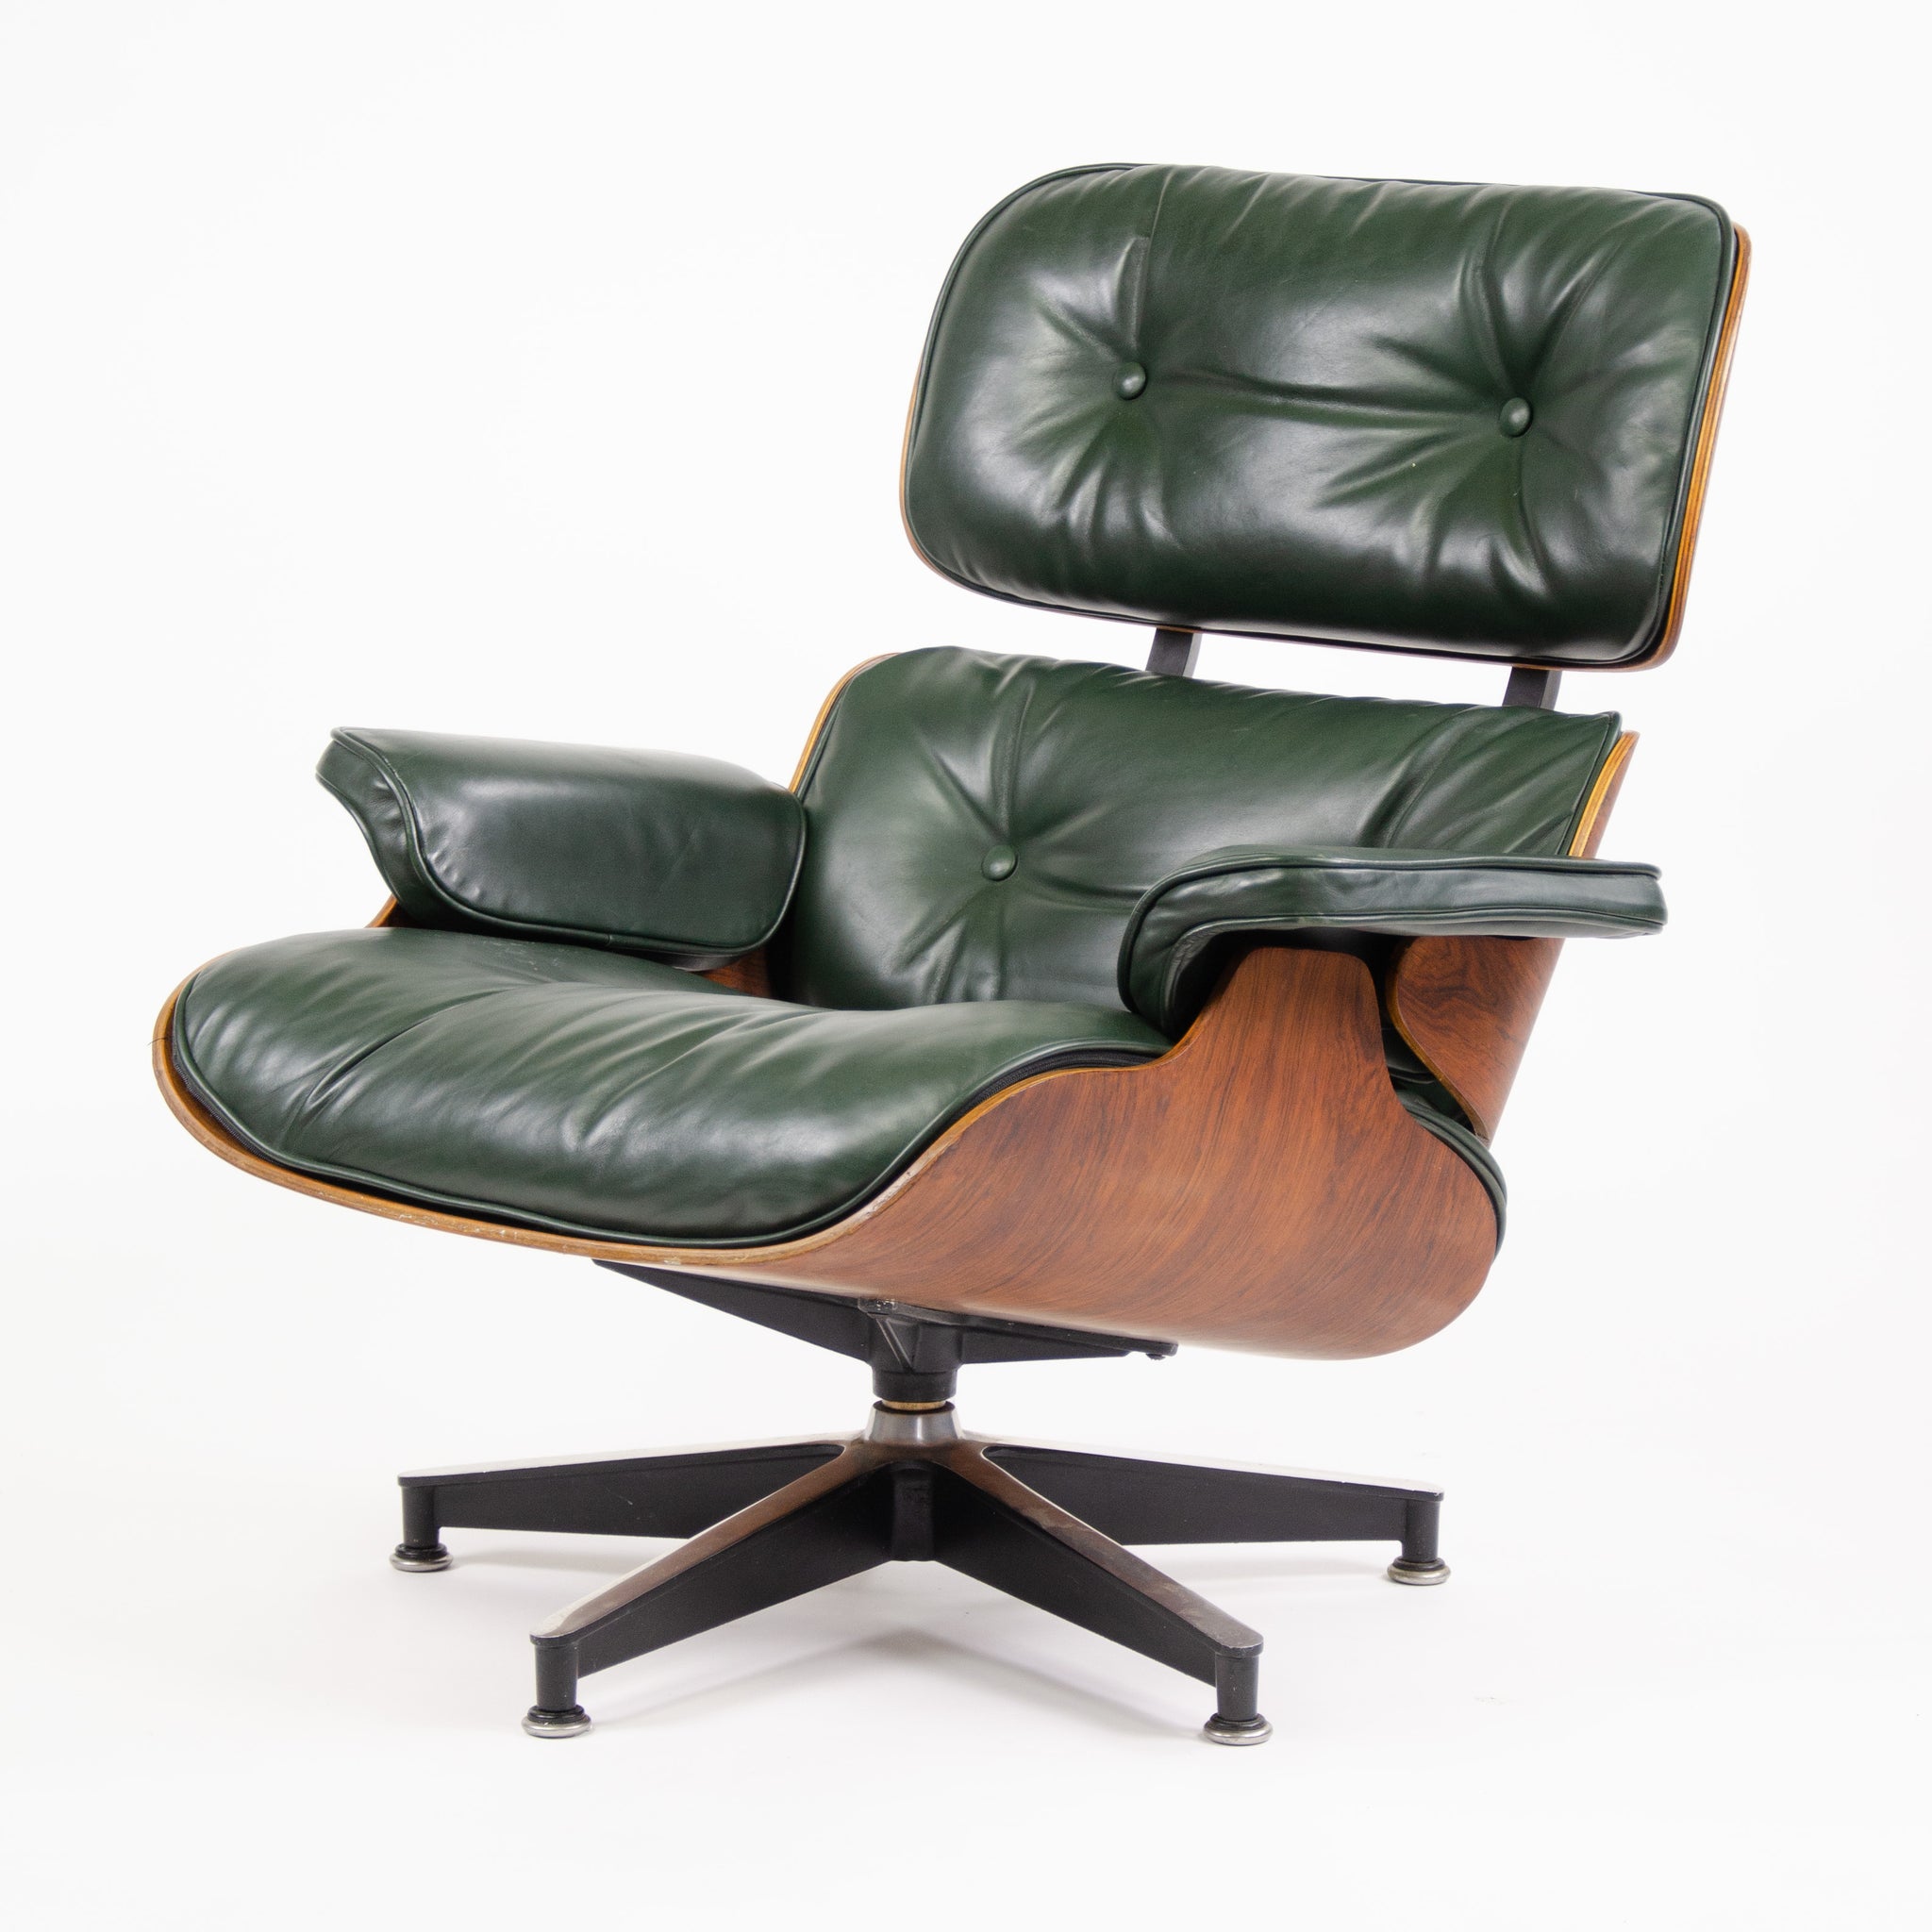 SOLD 1960's Herman Miller Eames Lounge Chair & Ottoman Rosewood 670 671 Green Leather